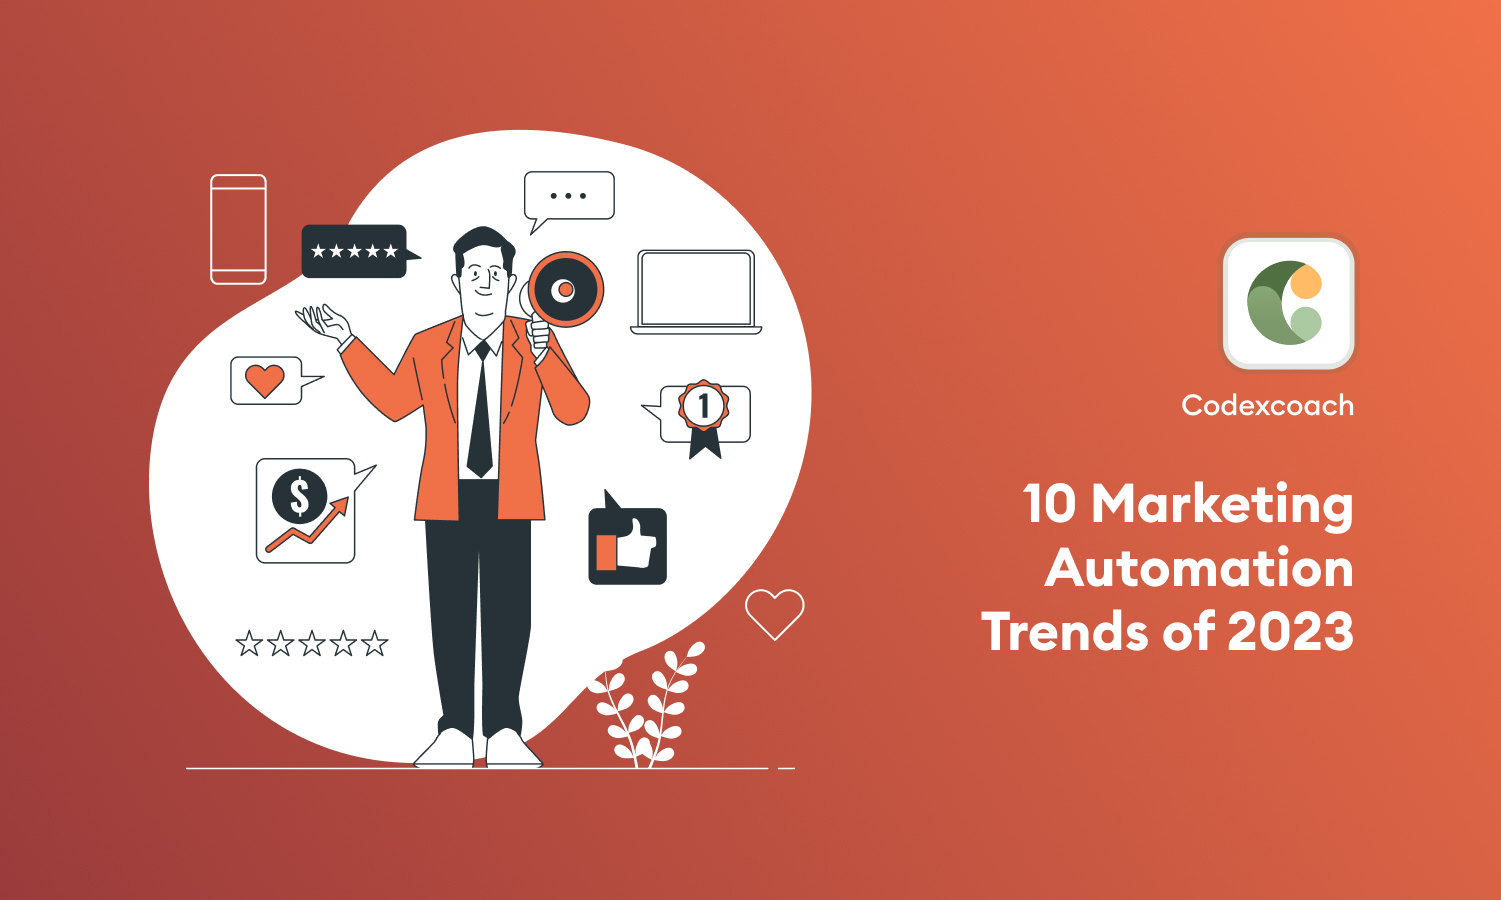 10 Marketing Automation Trends of 2023